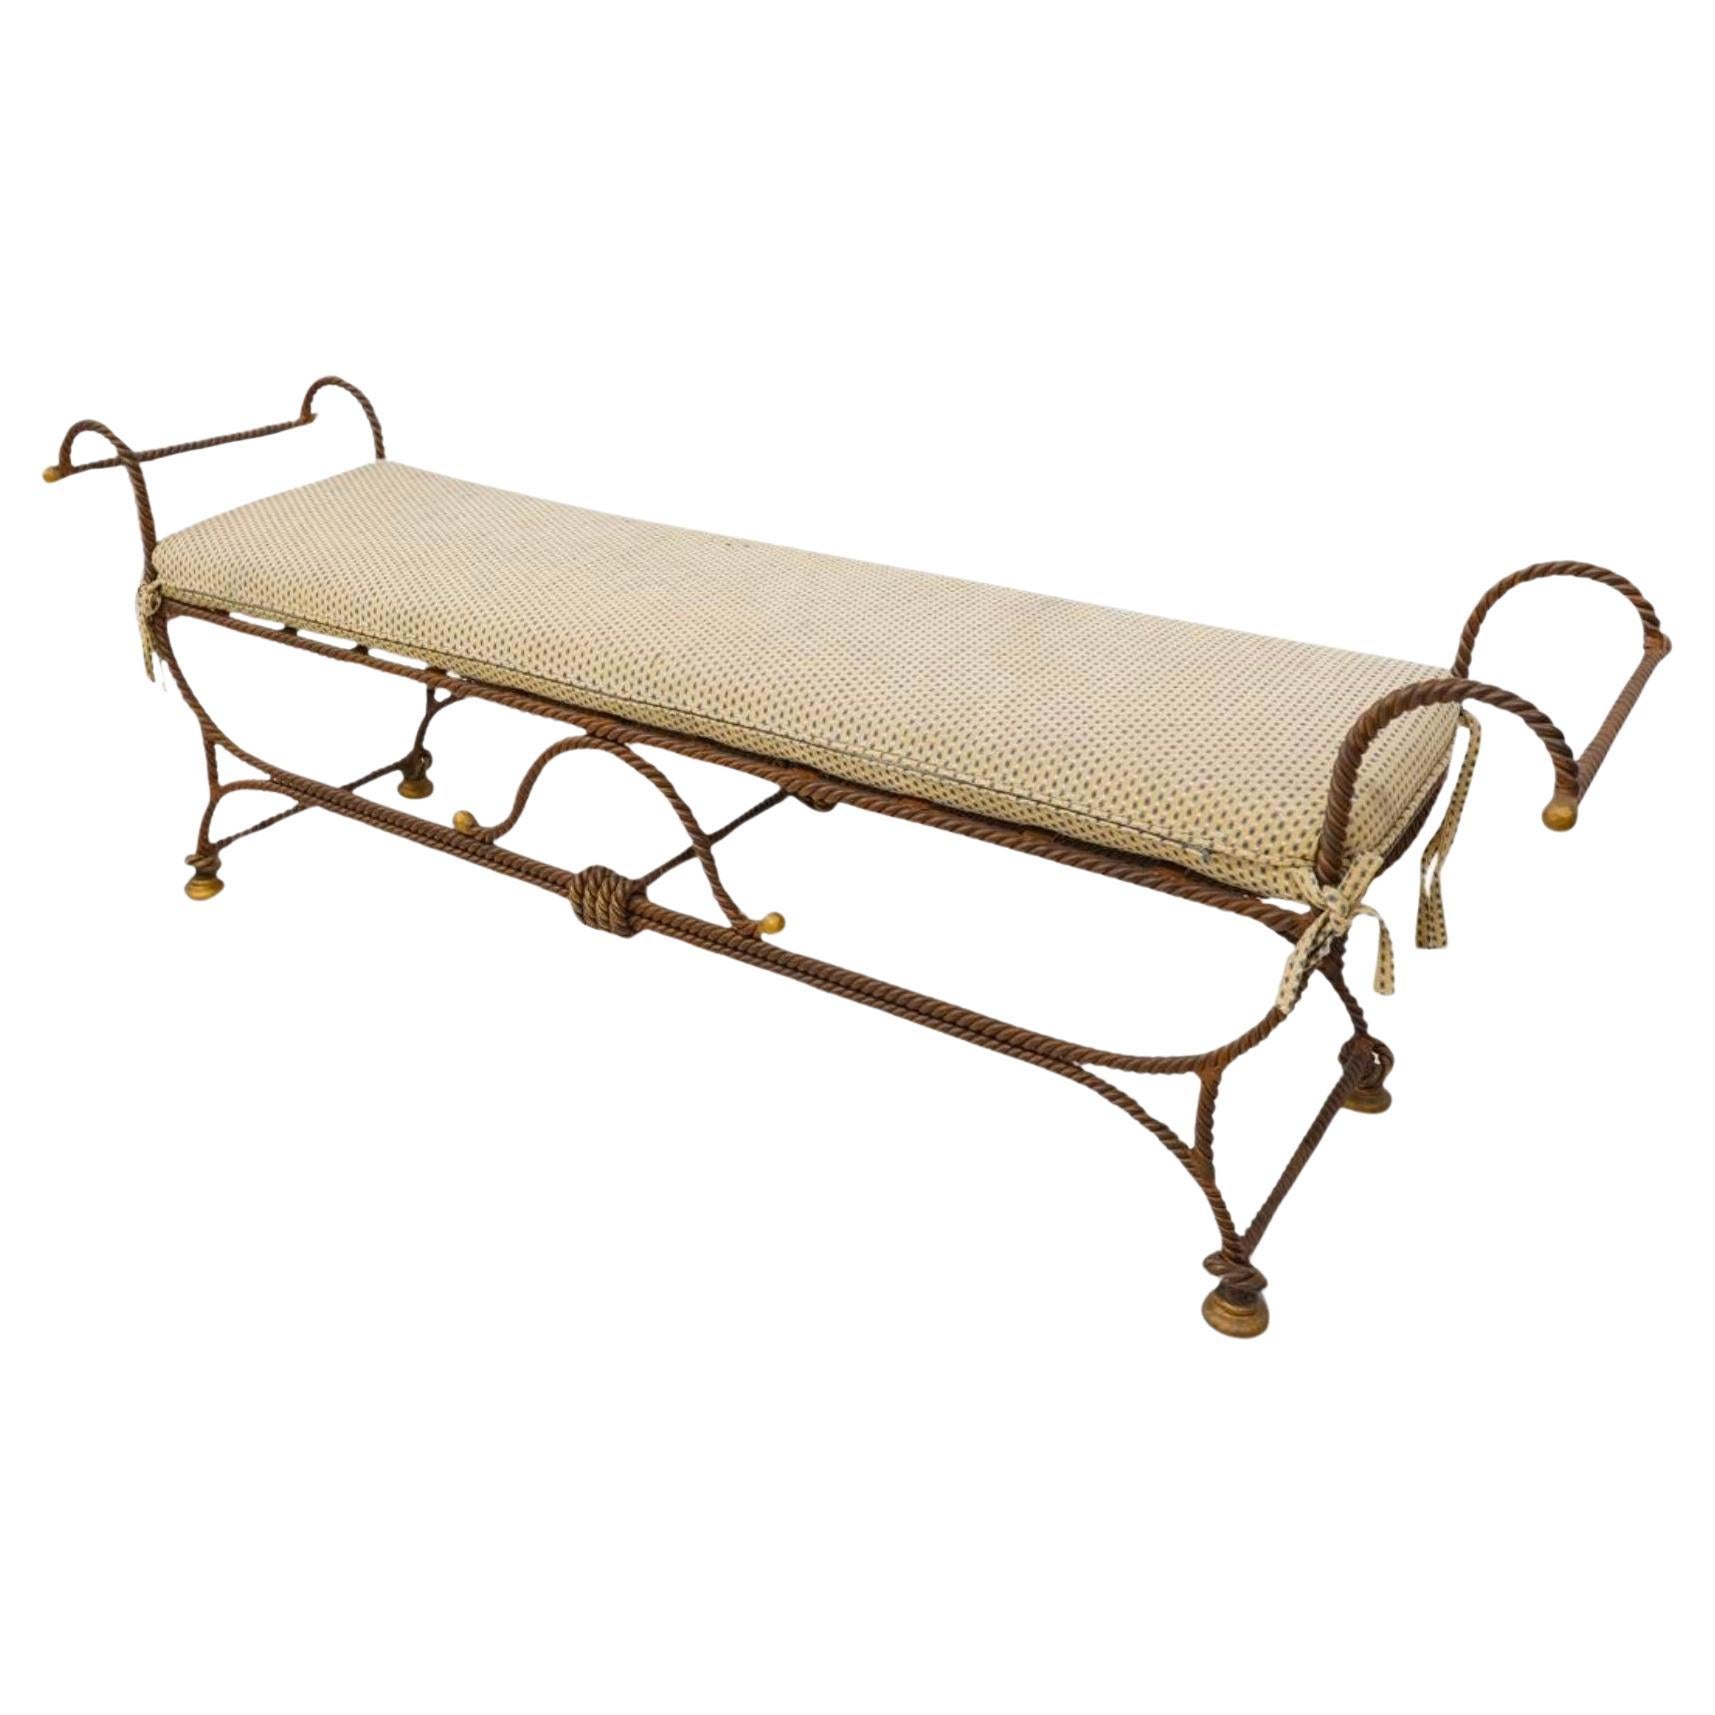 Hollywood Regency Neo-Classical Style Wrought Iron Bench W/ Rope / Tassel Motif In Good Condition For Sale In Kennesaw, GA